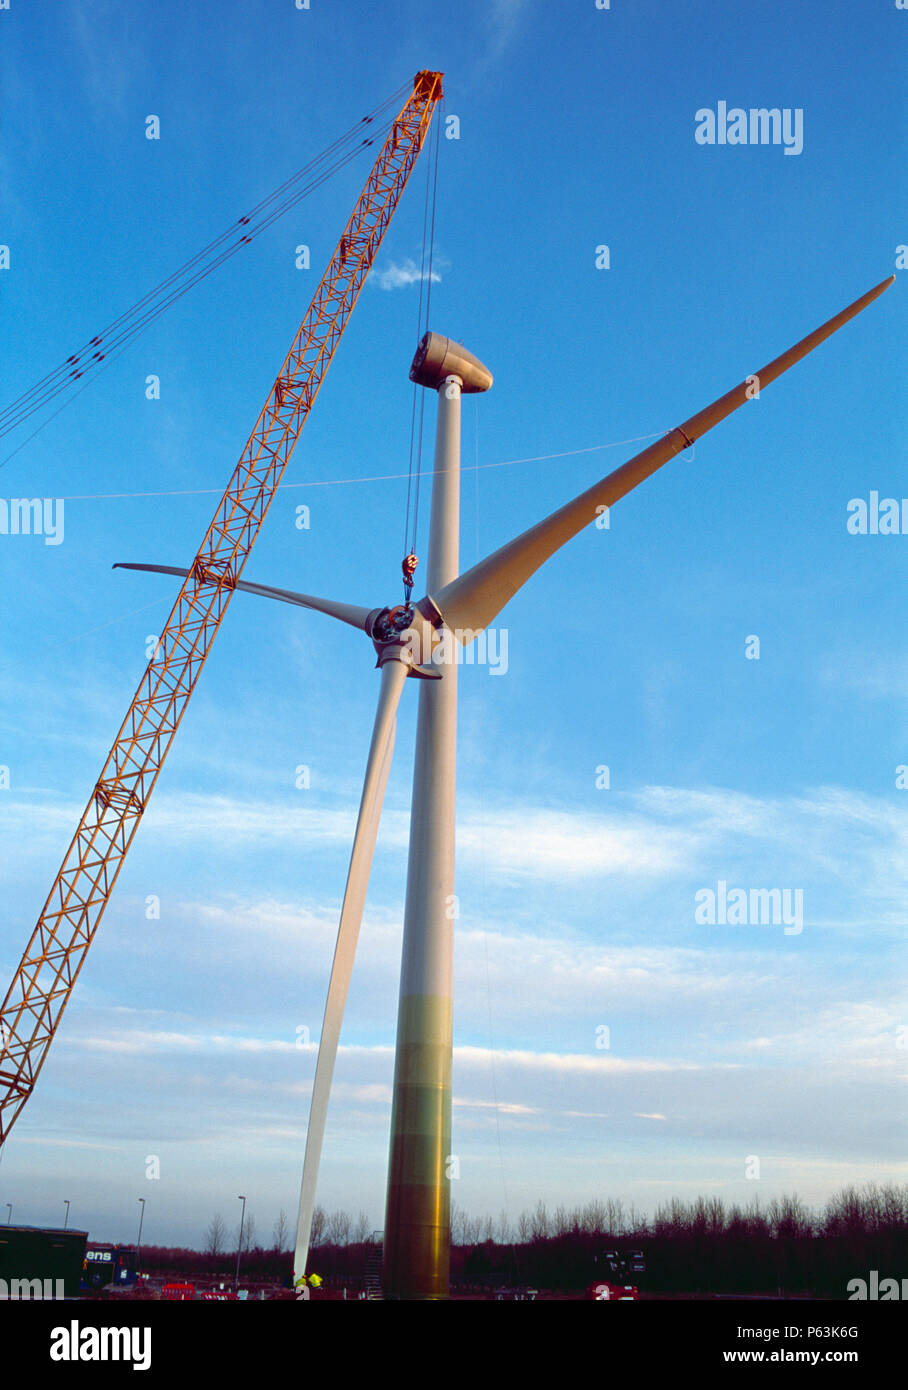 The hub and blades of a large Enercon wind turbine are winched into position at dawn. Worksop. United Kingdom. 2008. Stock Photo